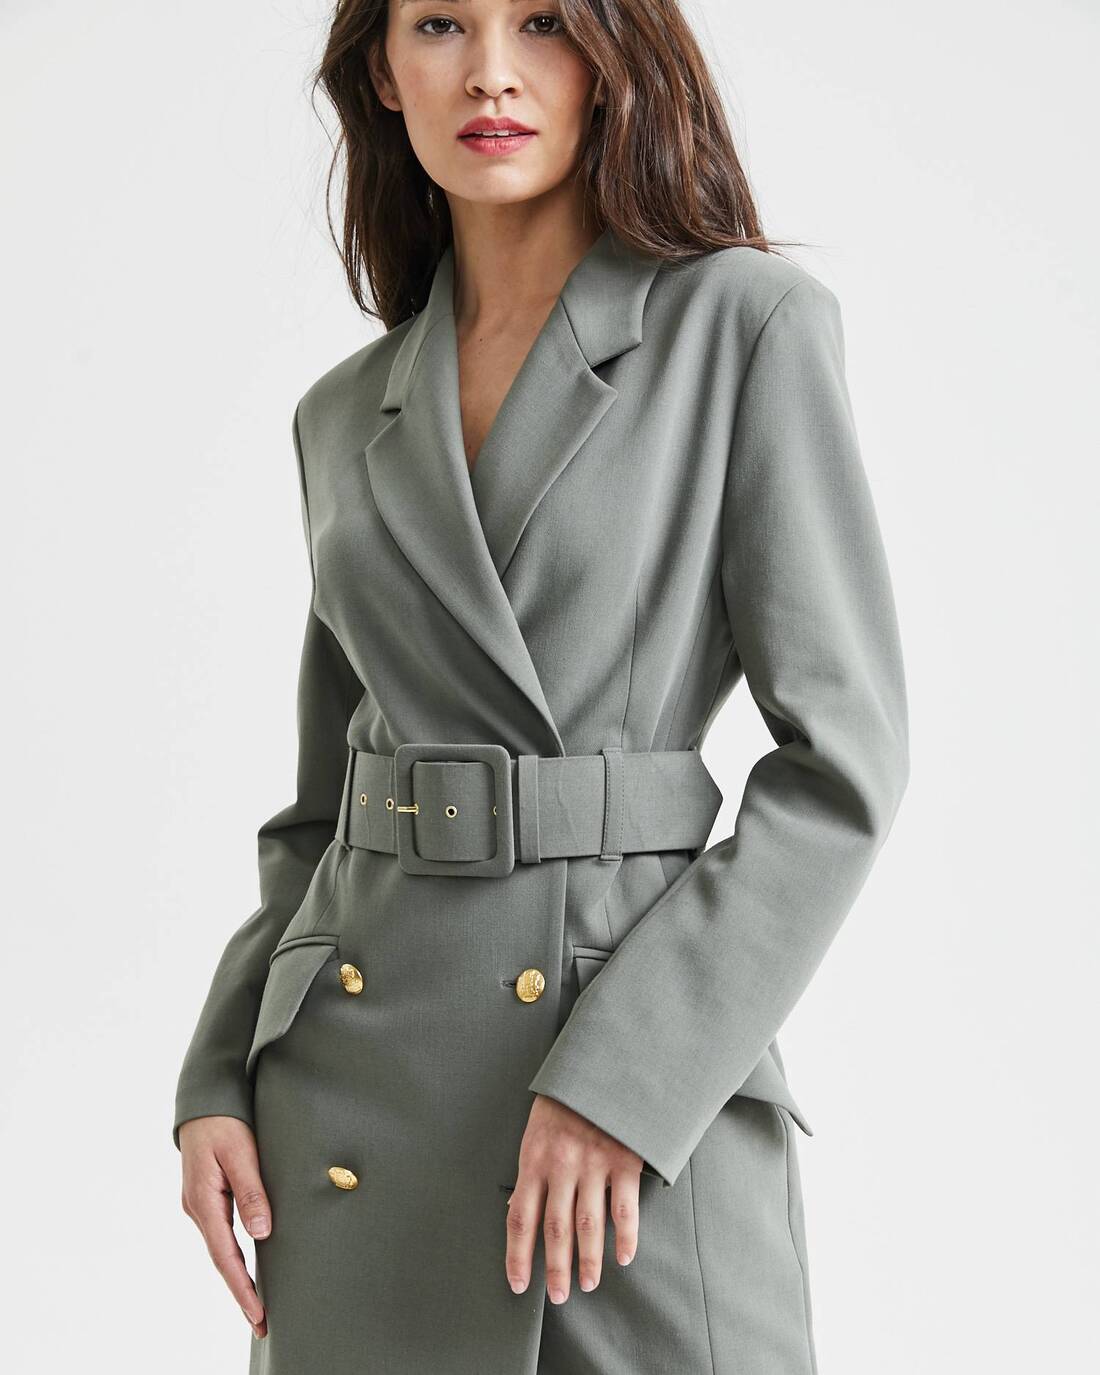 Belted suit dress